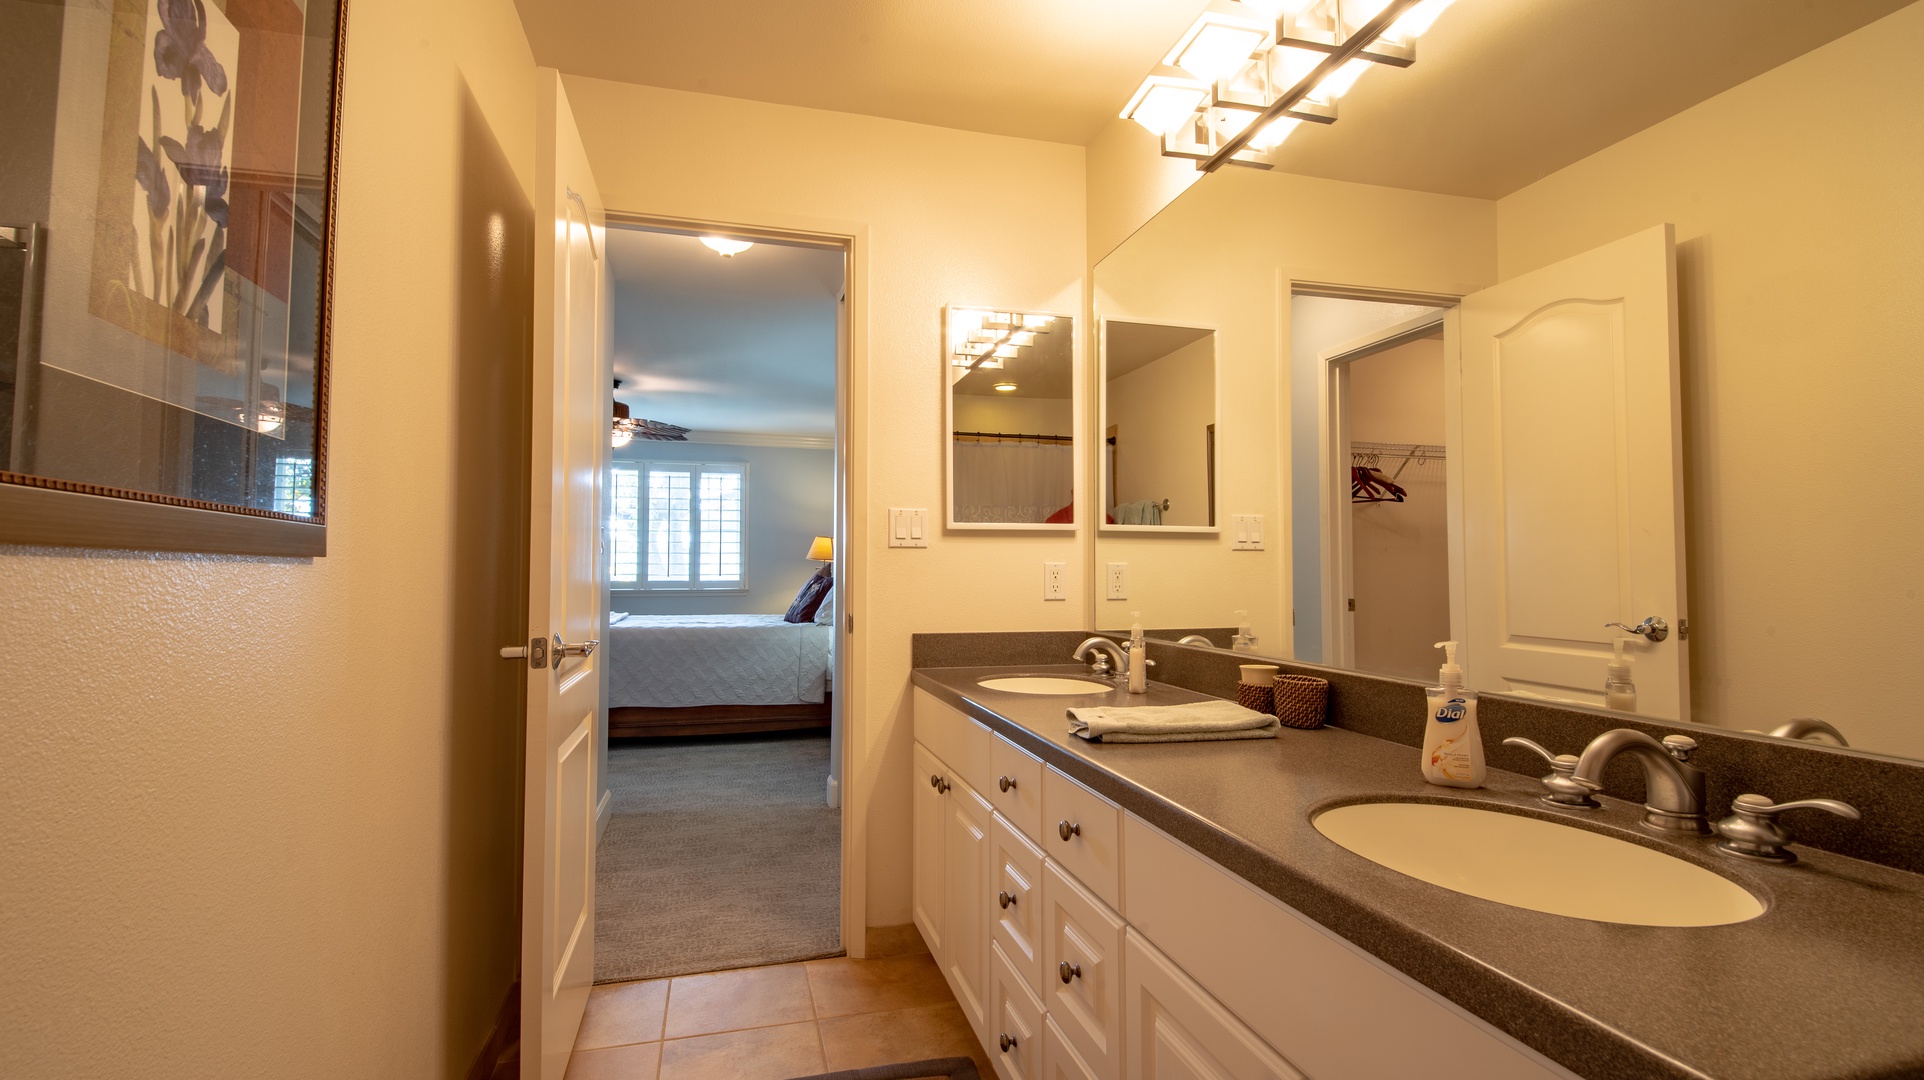 Kapolei Vacation Rentals, Ko Olina Kai 1047B - The primary guest bathroom featuring a shower and double vanity.